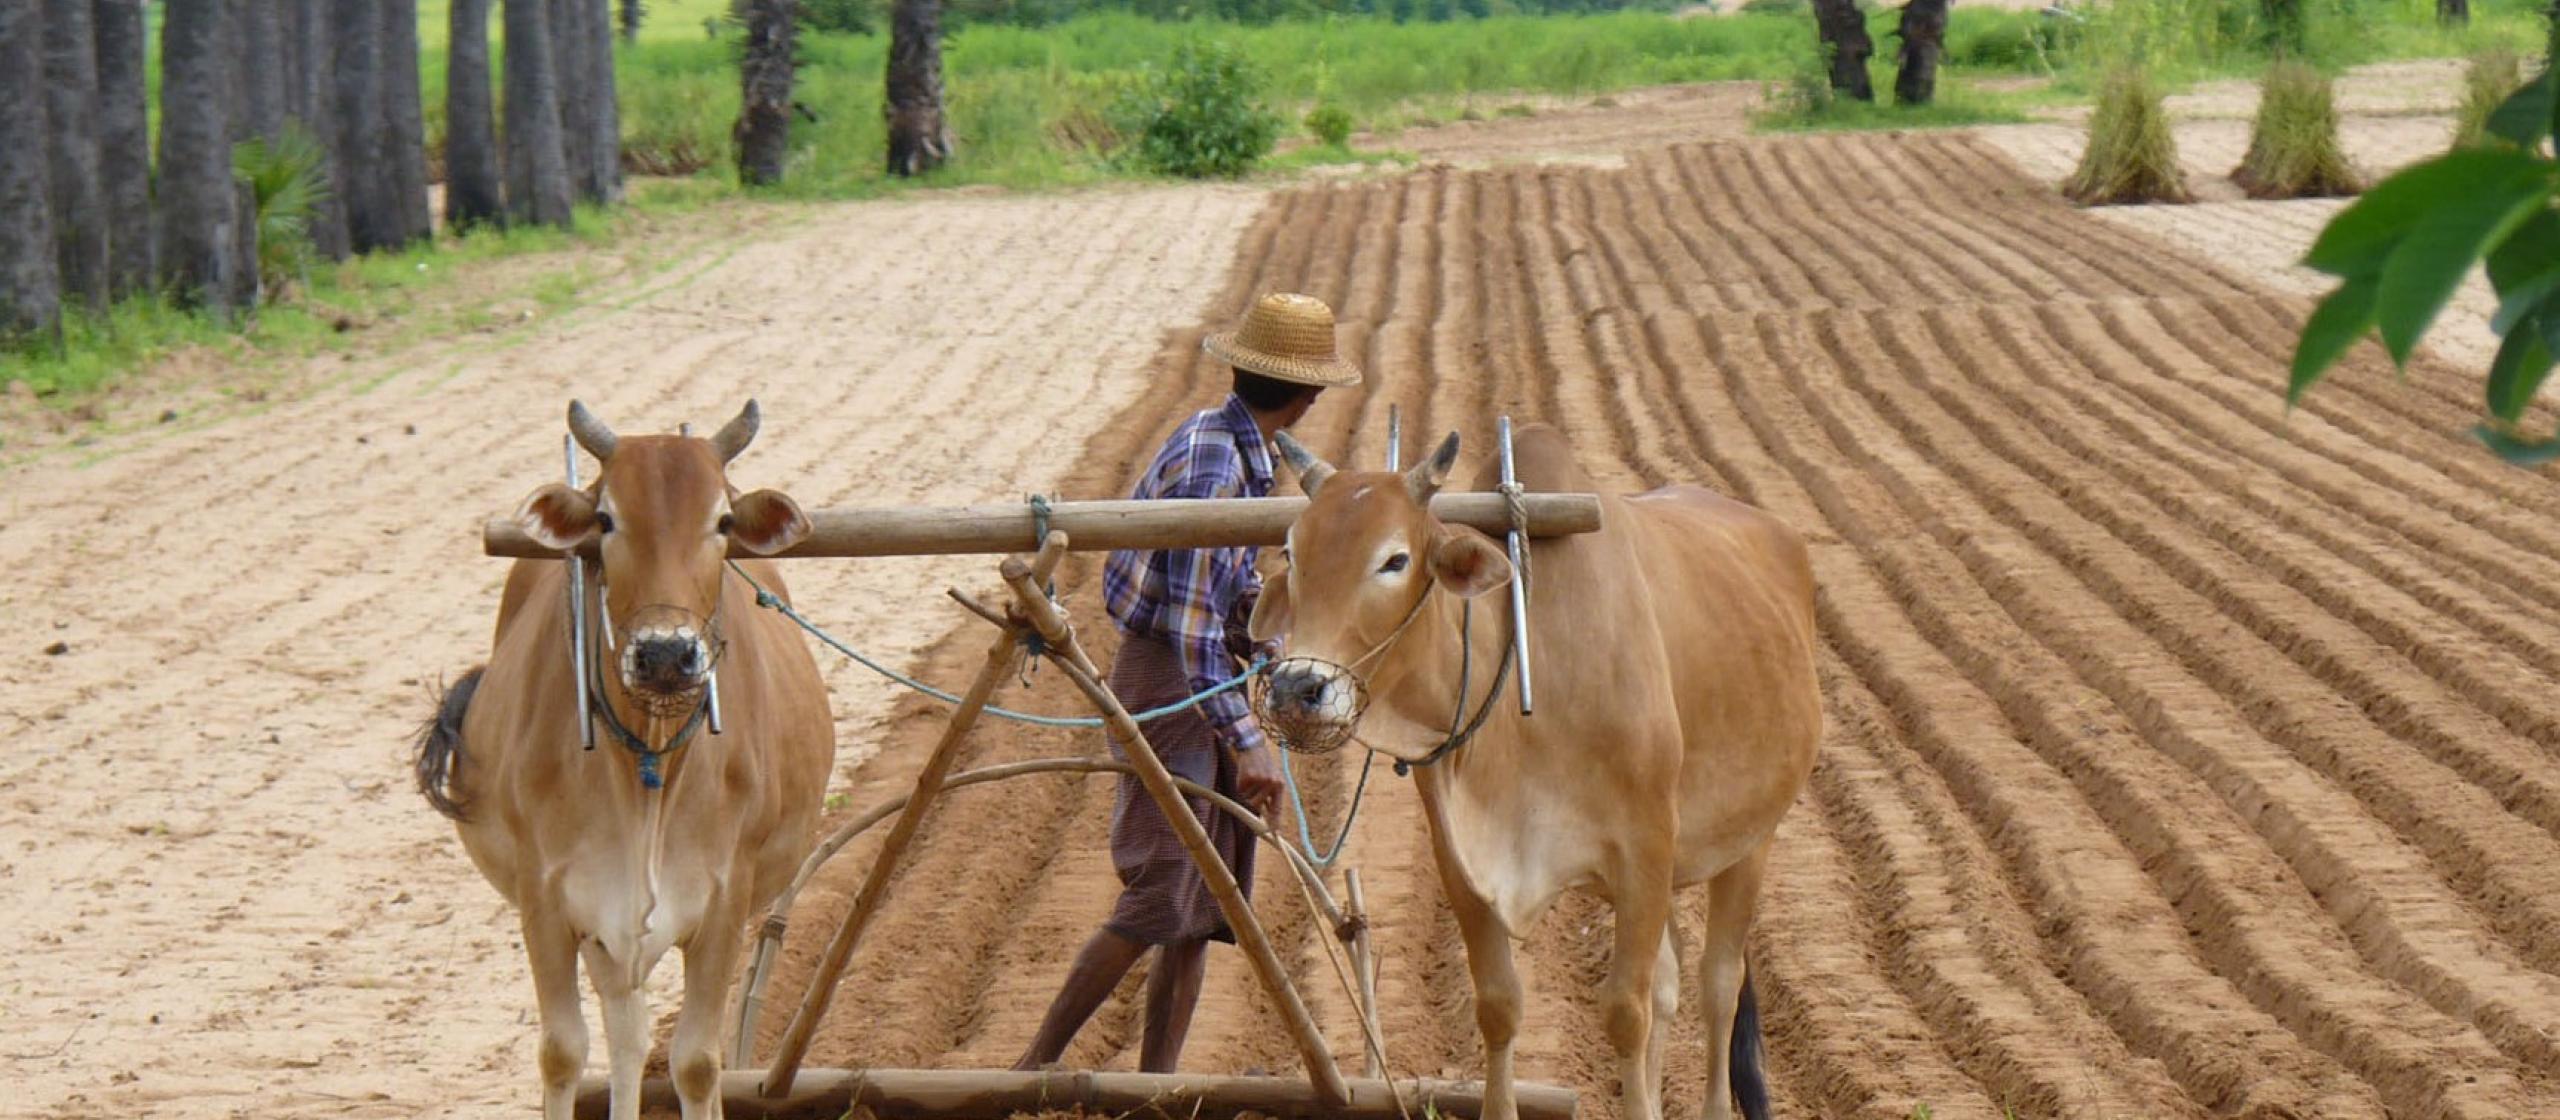 A farmer uses cattle to plough a field